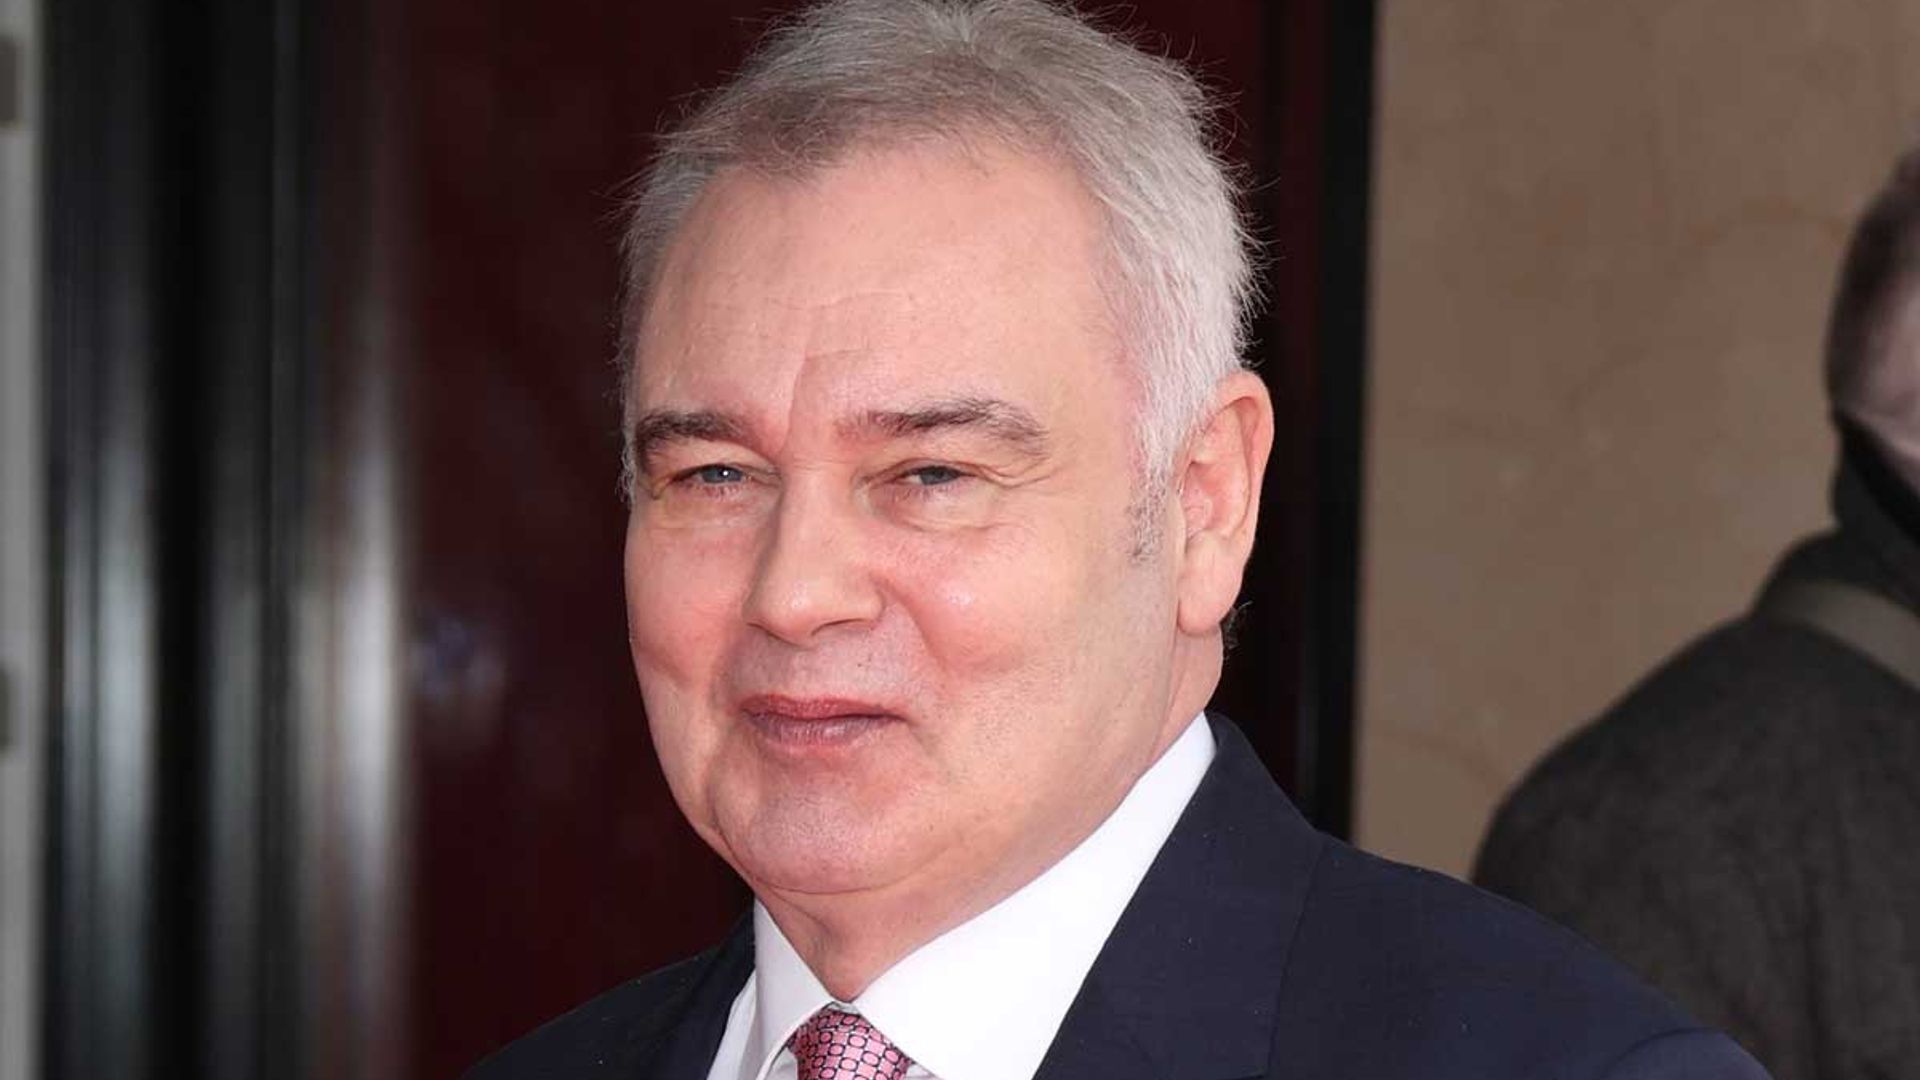 Eamonn Holmes speaks candidly about A&E hospital dash amid 'excruciating pain'